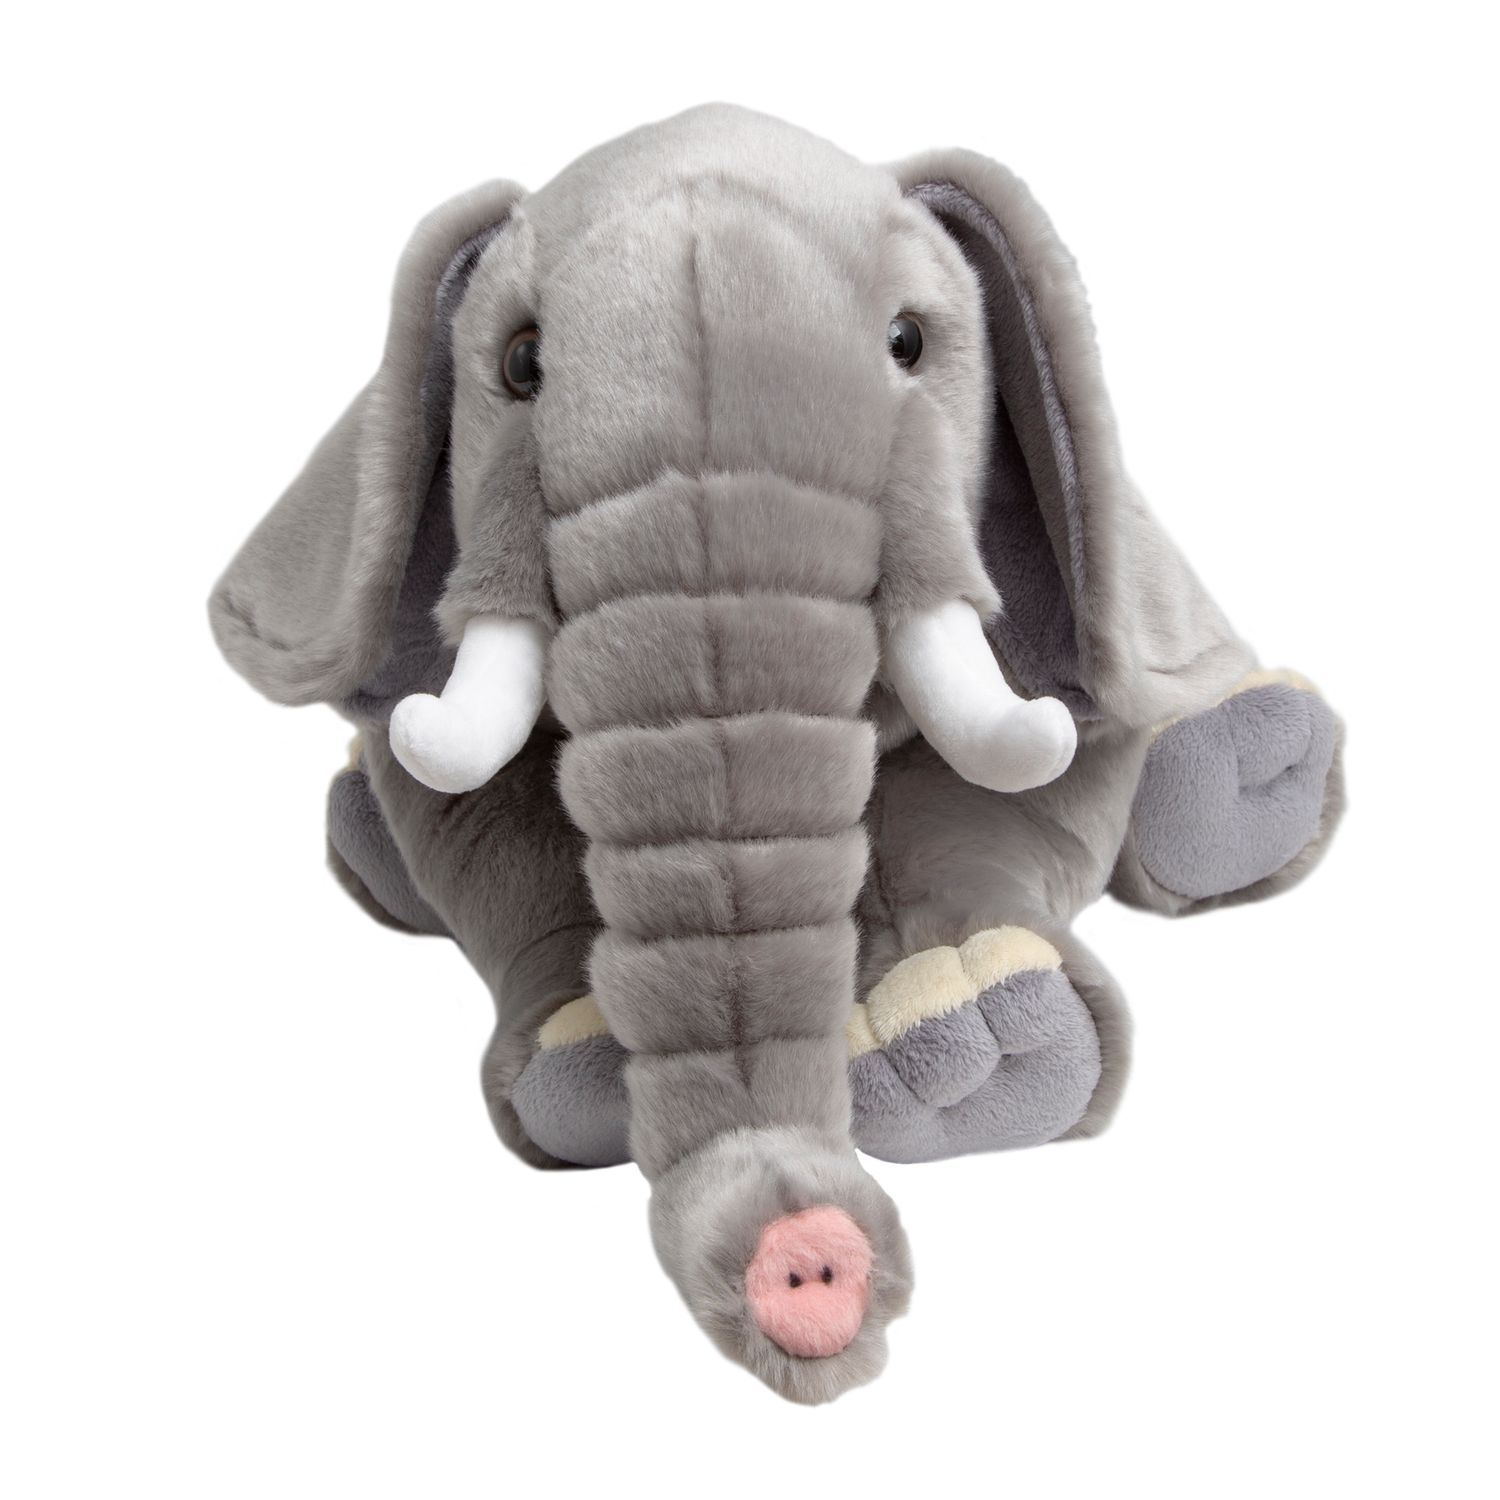 plush elephant for your baby to snuggle